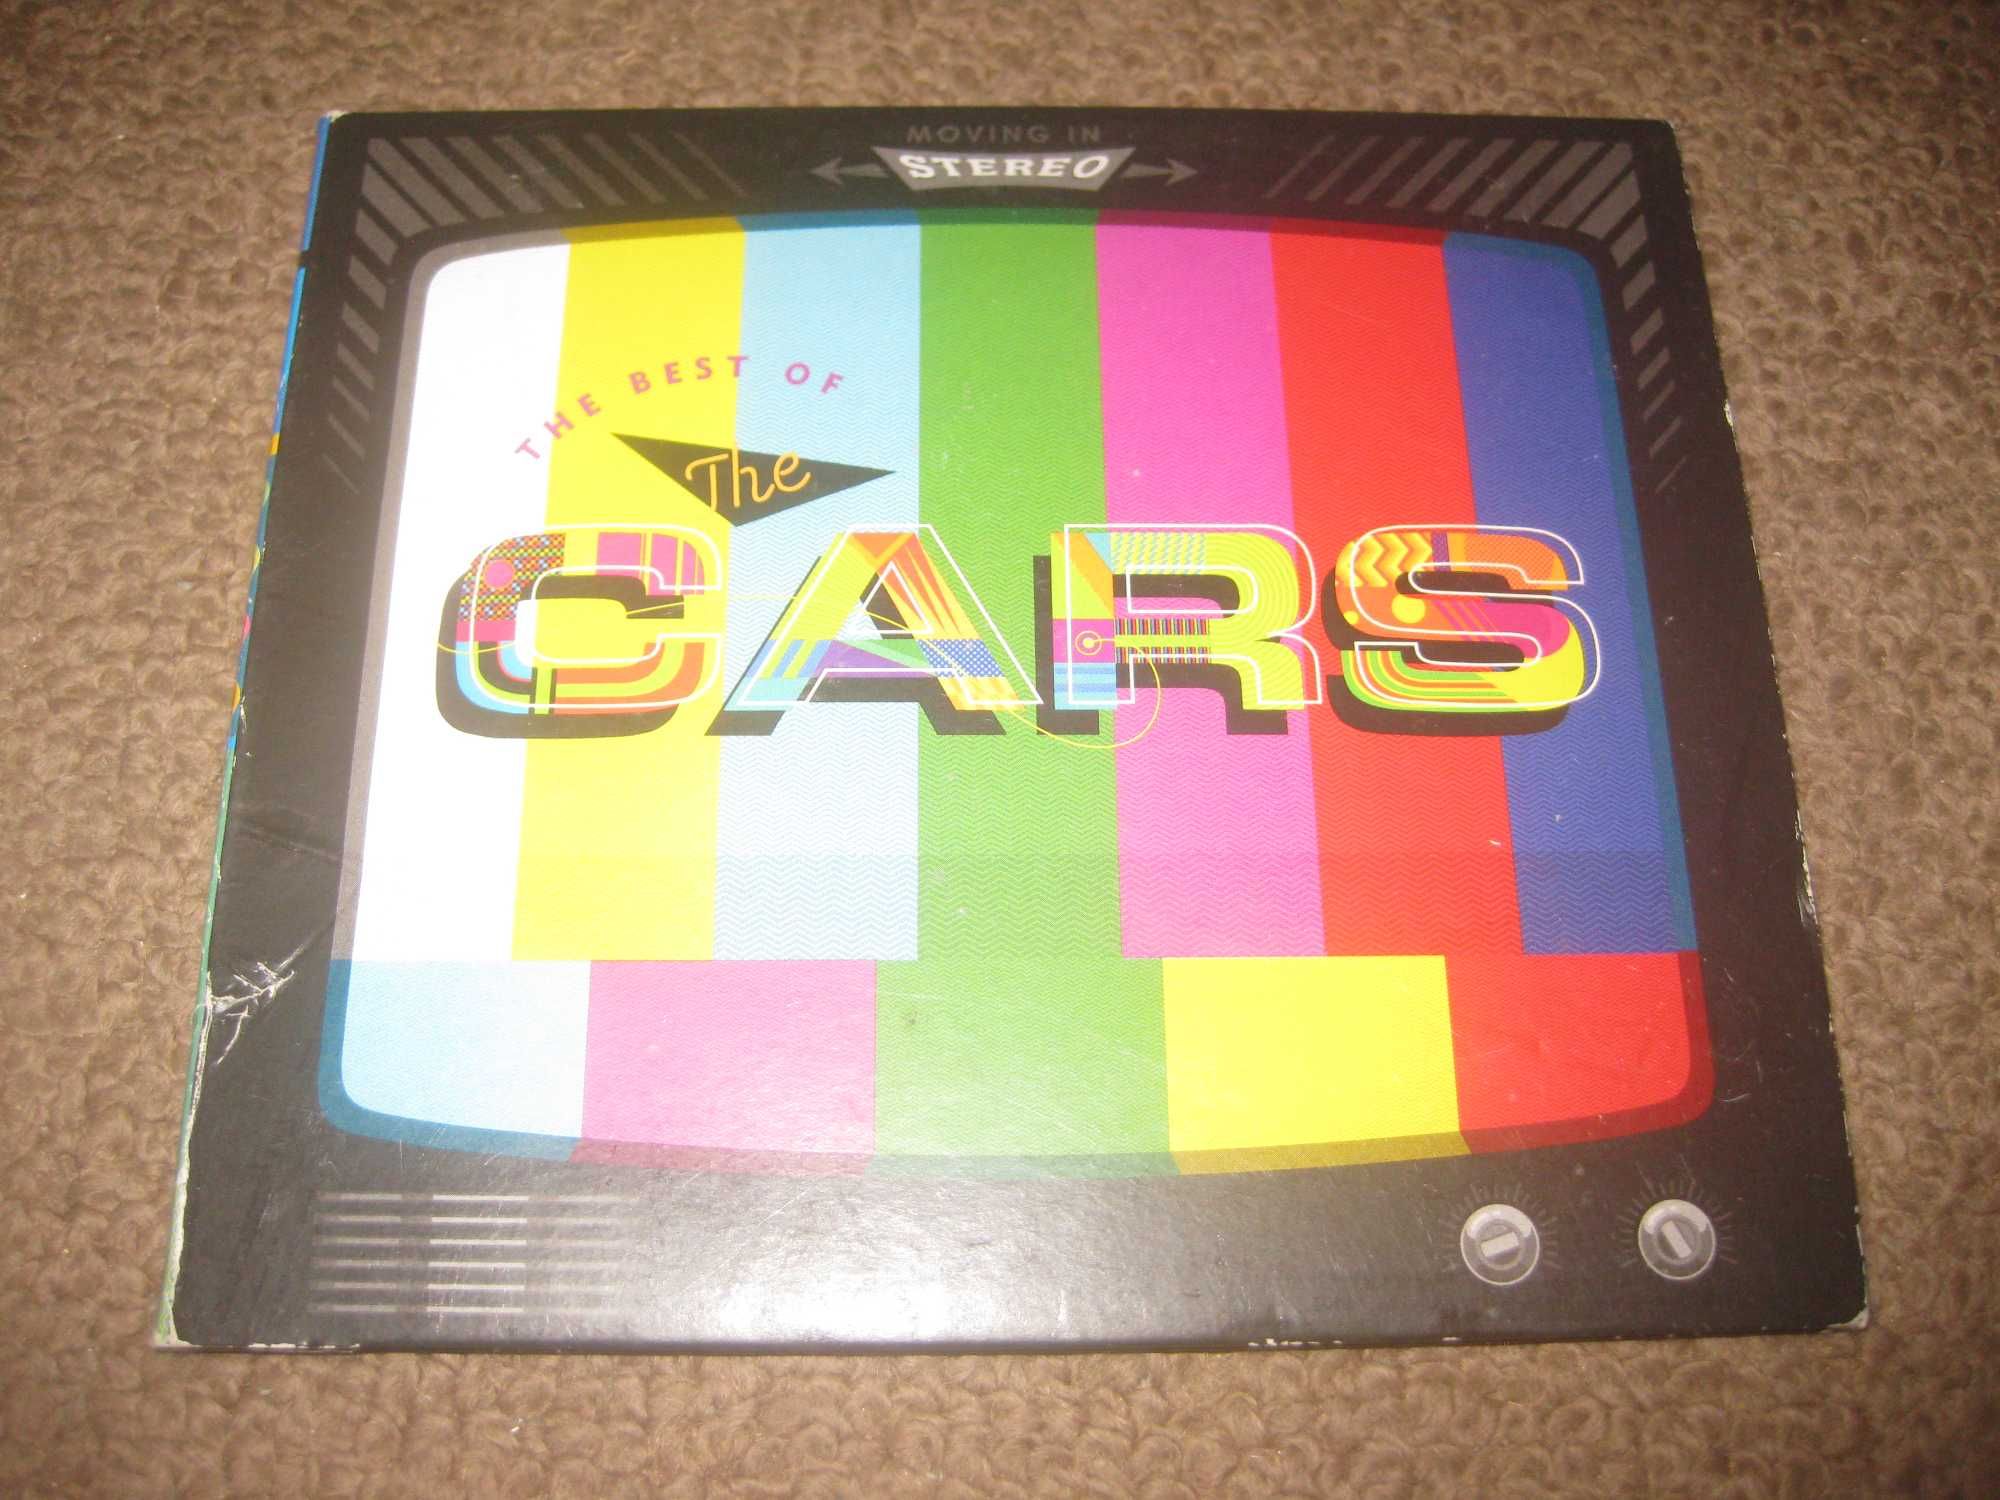 CD dos The Cars "Moving In Stereo: The Best Of The Cars" Digipack!